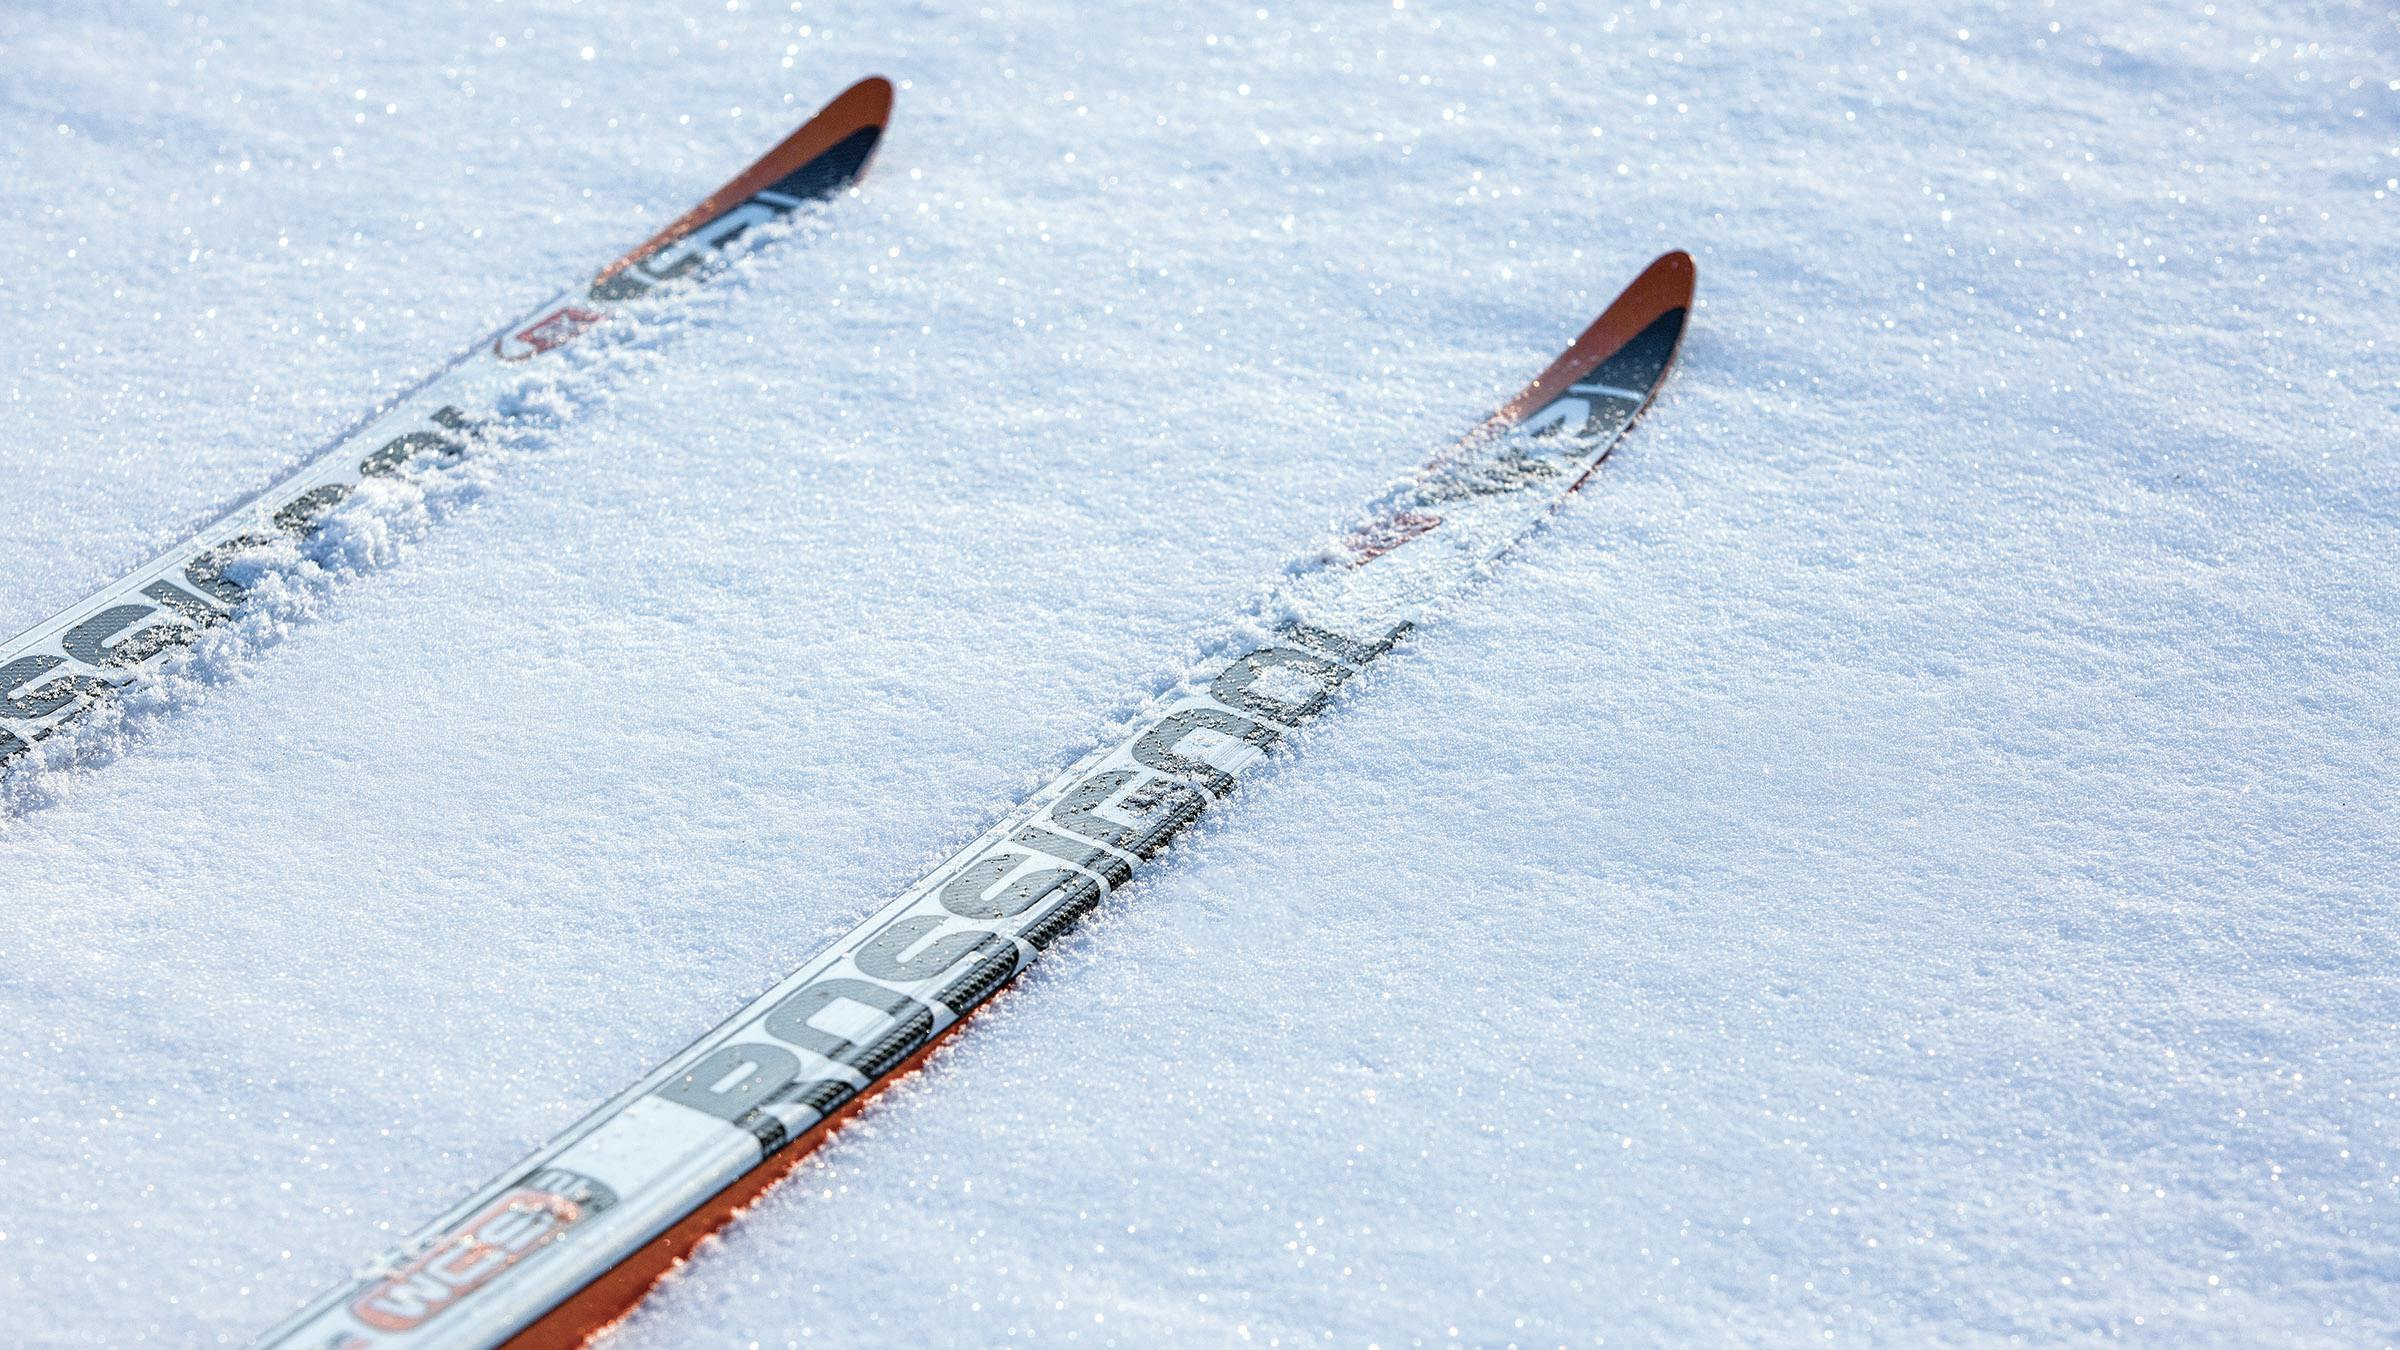 Close up of Rossignol cross-country skis on snow